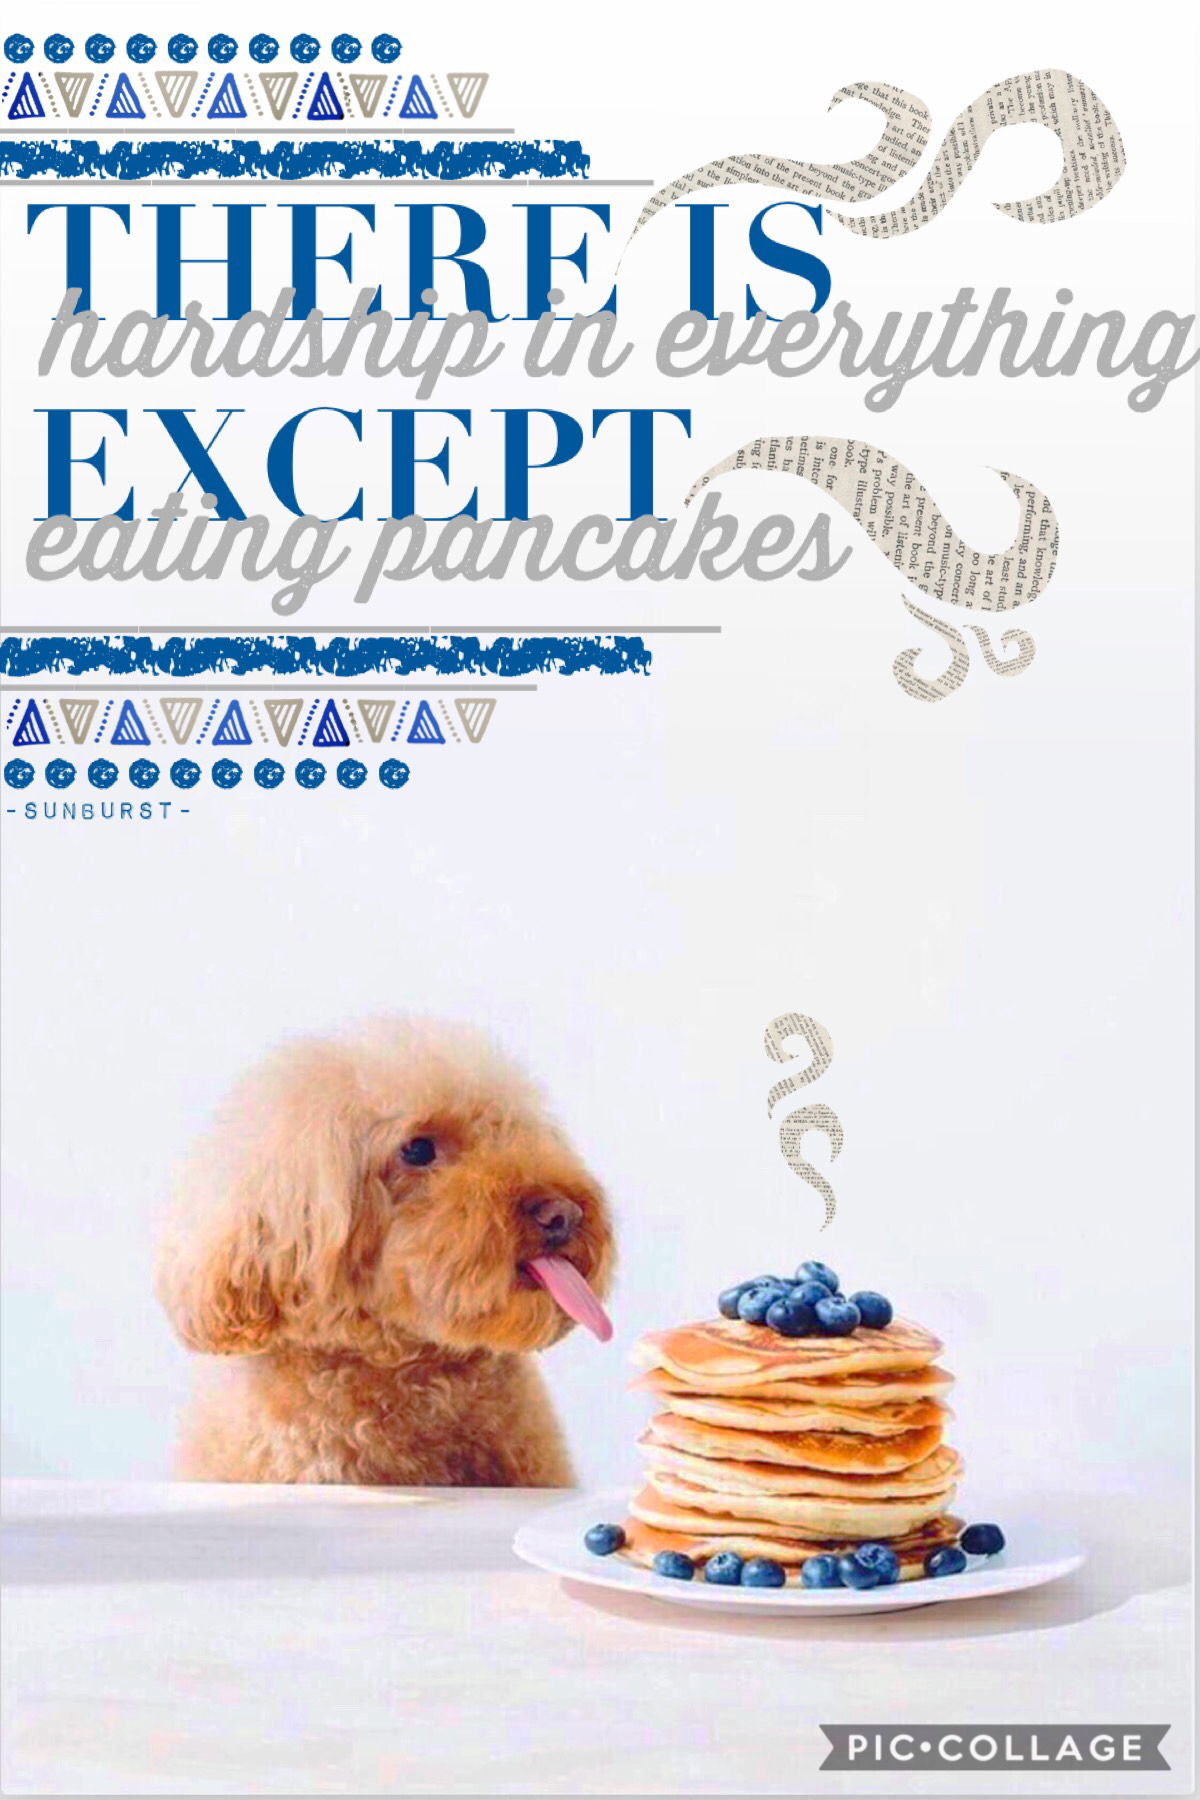 > CLICK FOR PANCAKES <
🥞 🤤 
THE PUPPY IS SOO FWUFFY
credits to simplicity_extras!
SHE IS AWESOME FOLLOW HER
QOTD: pancakes or waffles?
AOTD: PANCAKES 🥞 